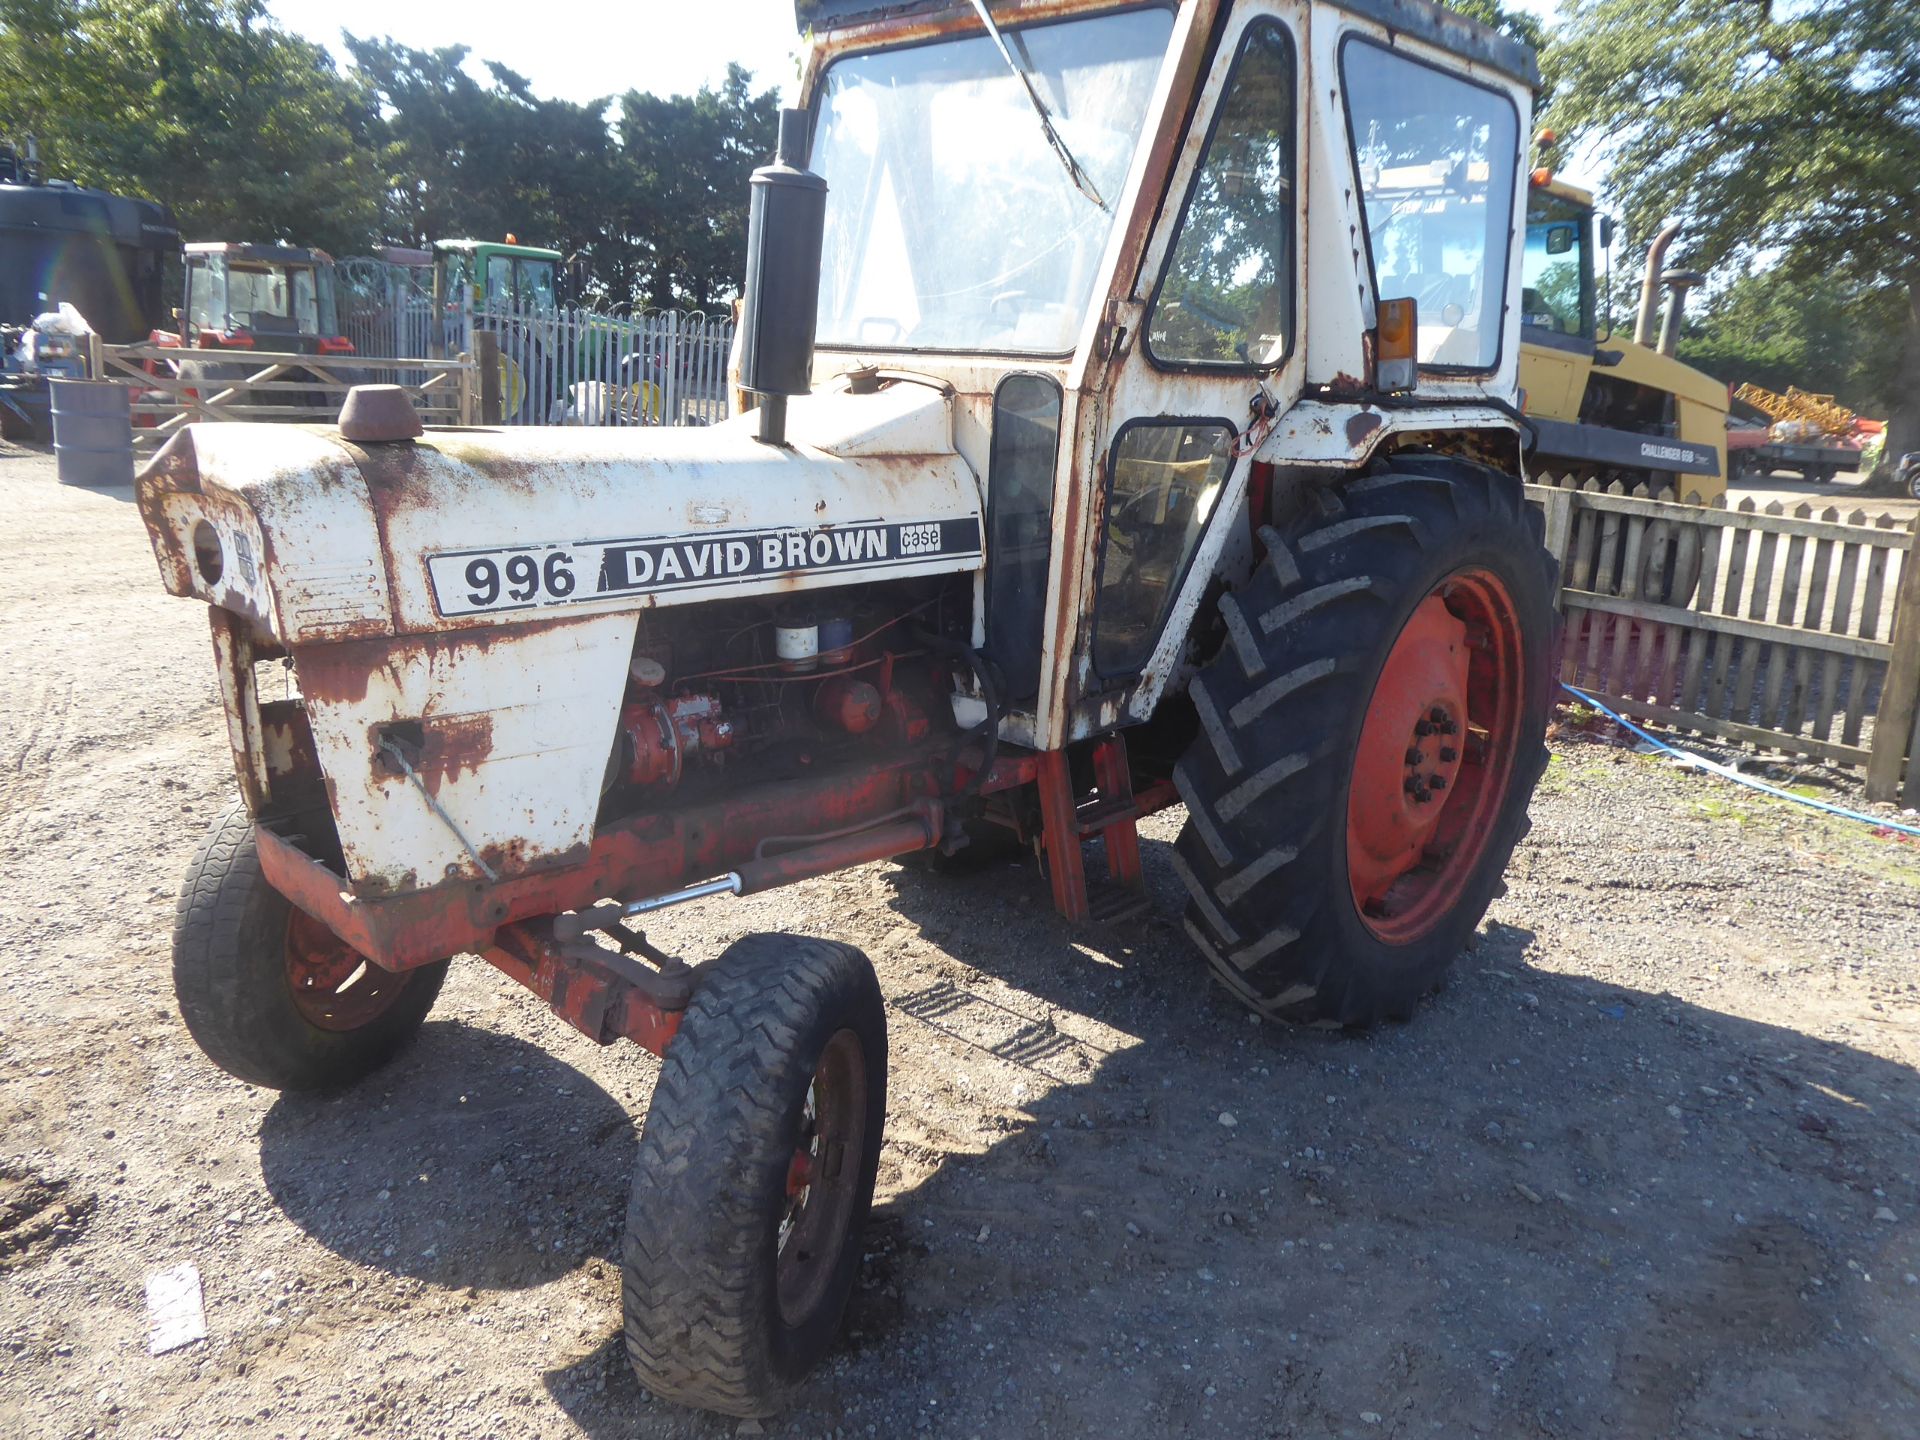 David Brown 996 tractor for restoration PWW 747R - Image 4 of 4